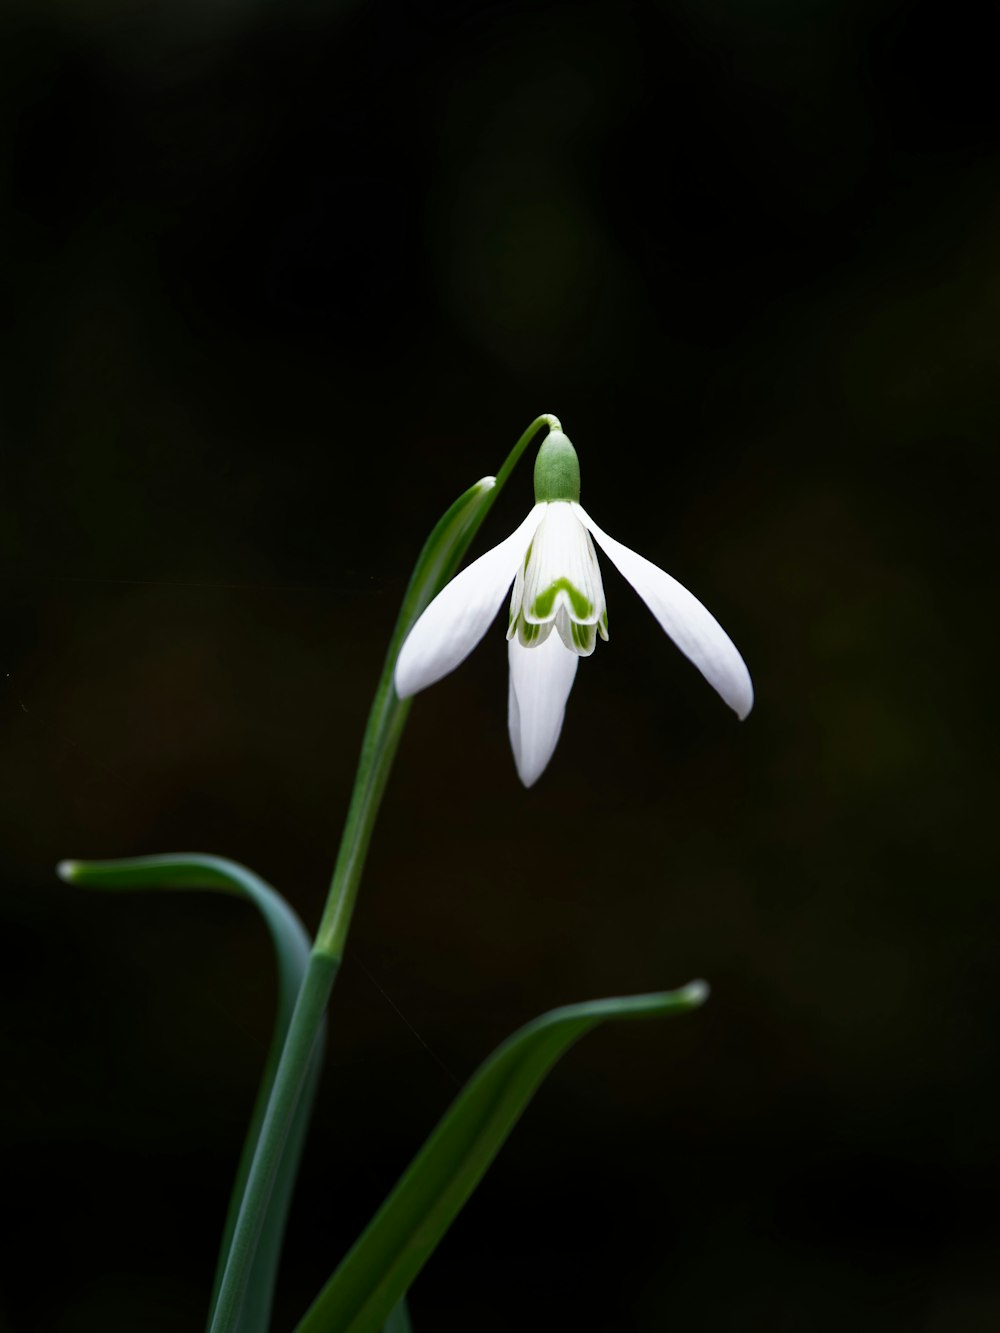 a single white flower with a green stem